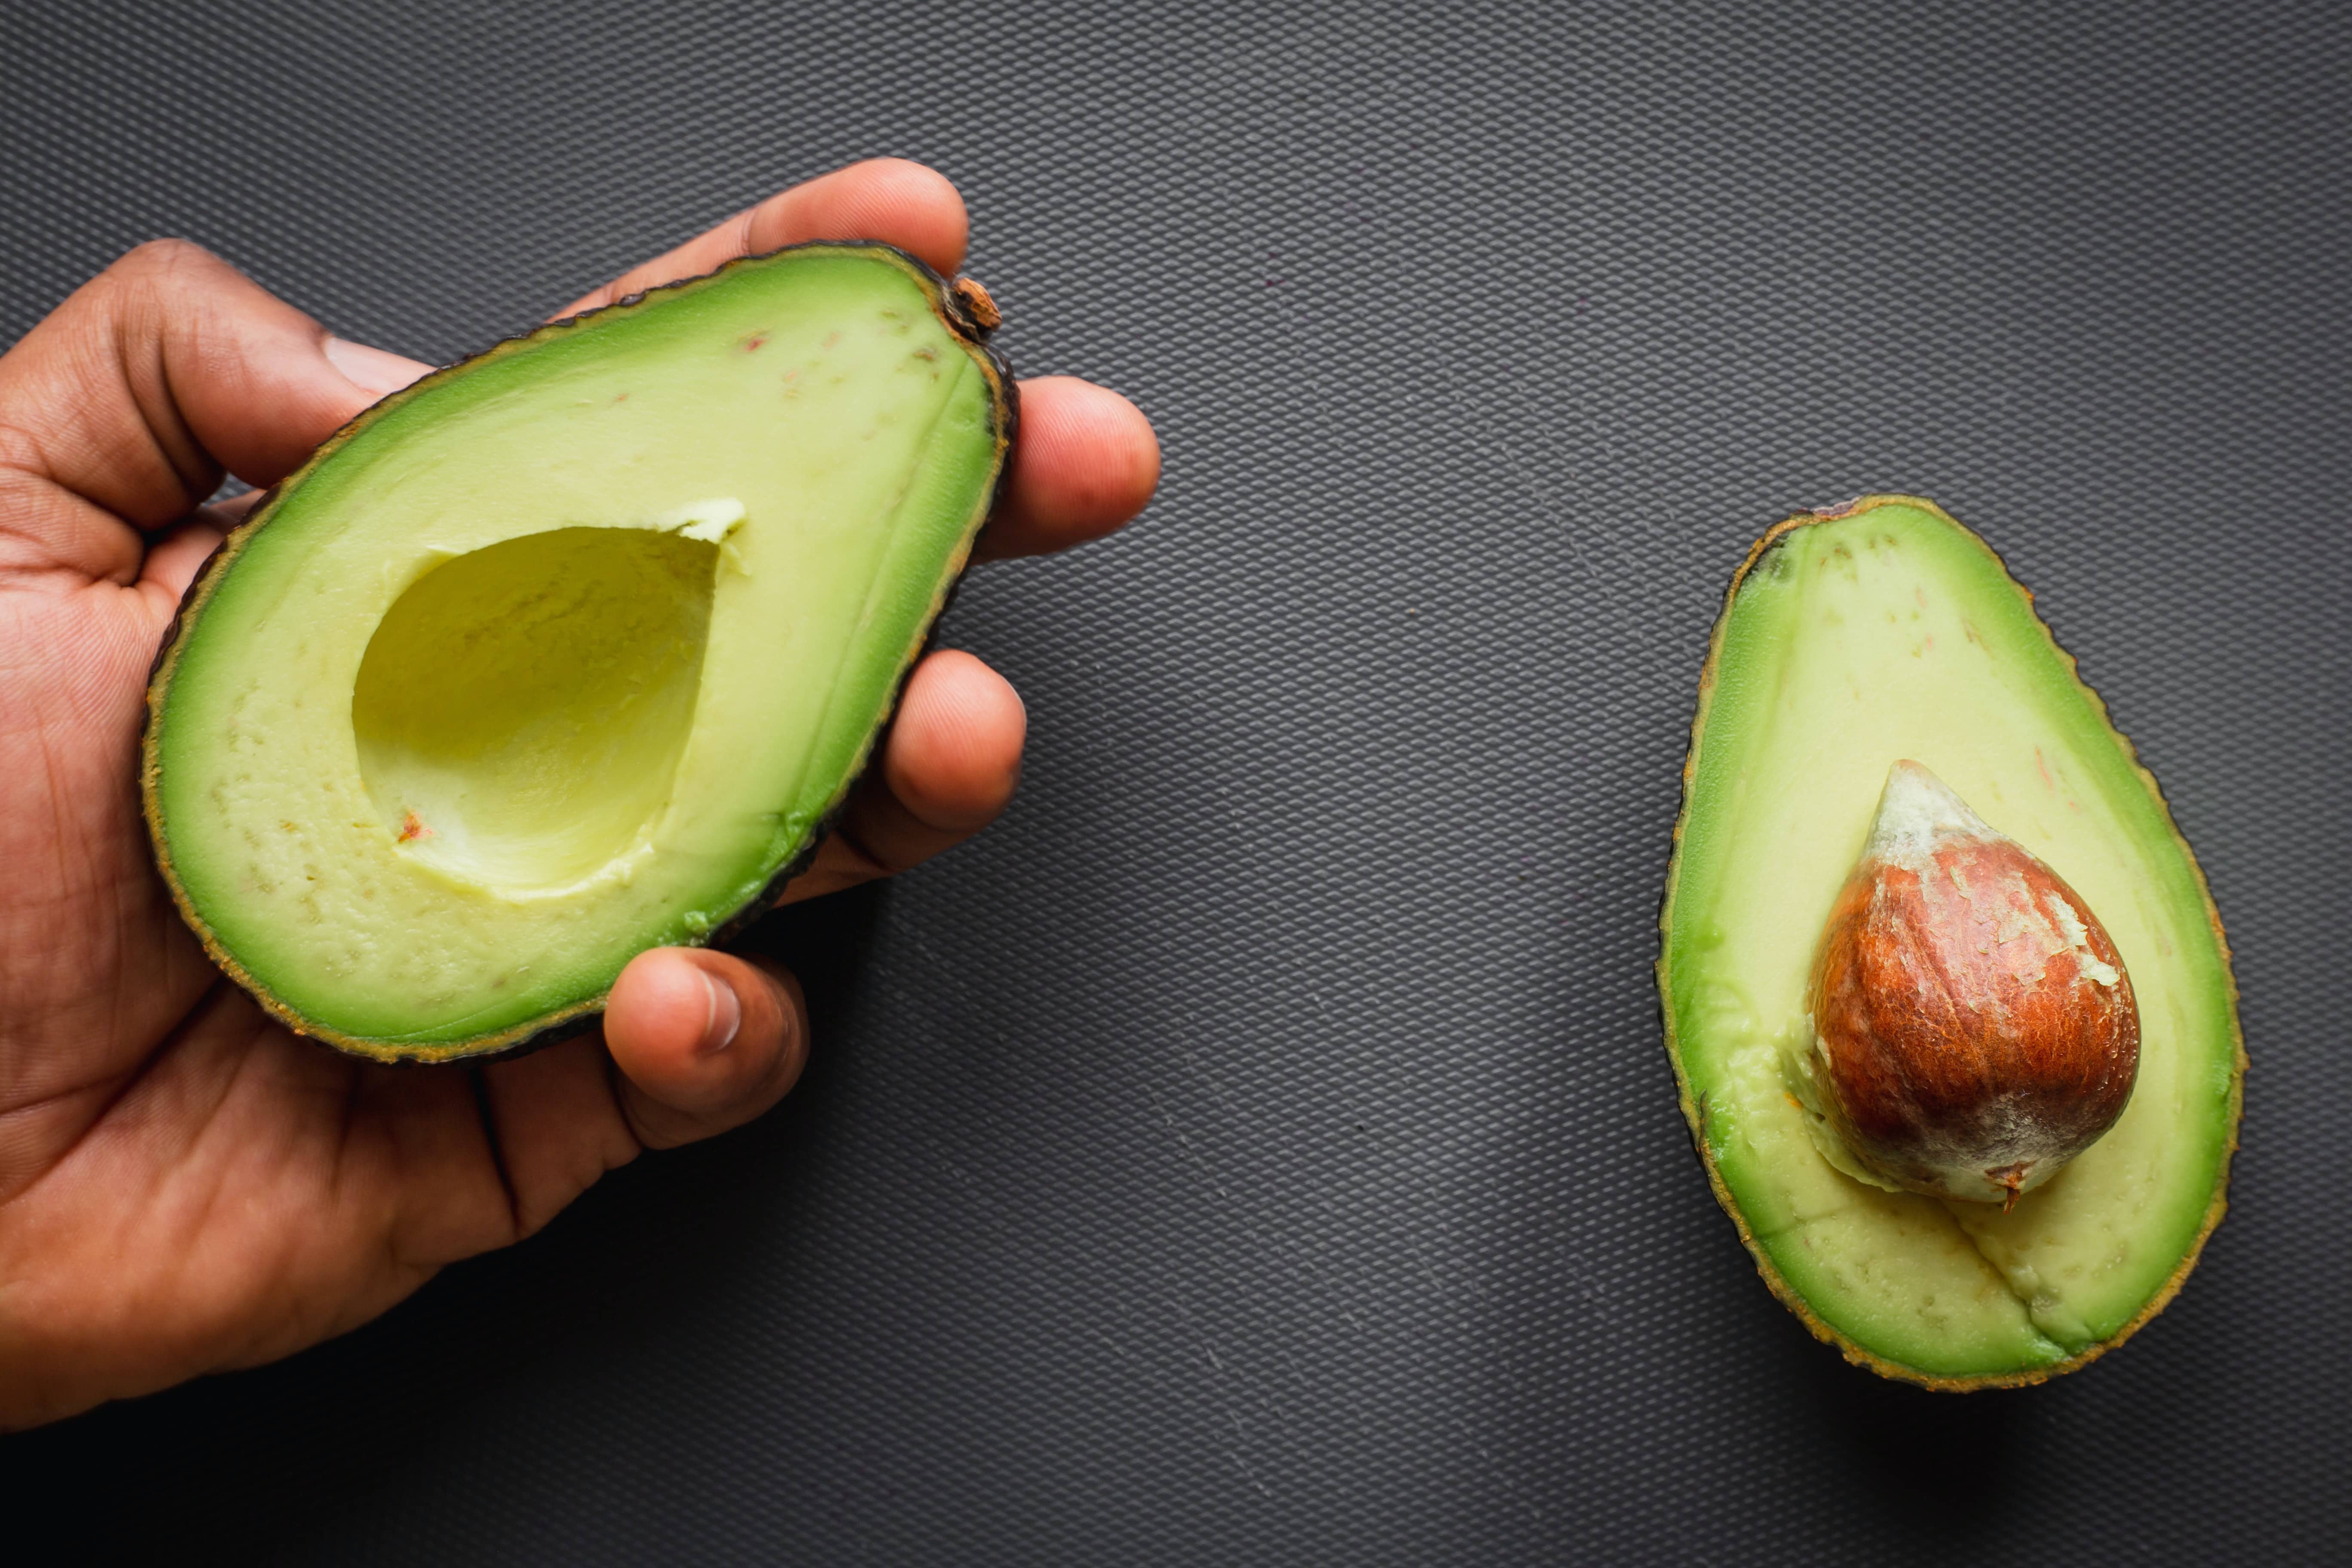 avocado sliced in half with large seed inside one half, along with a dish made with avocado.